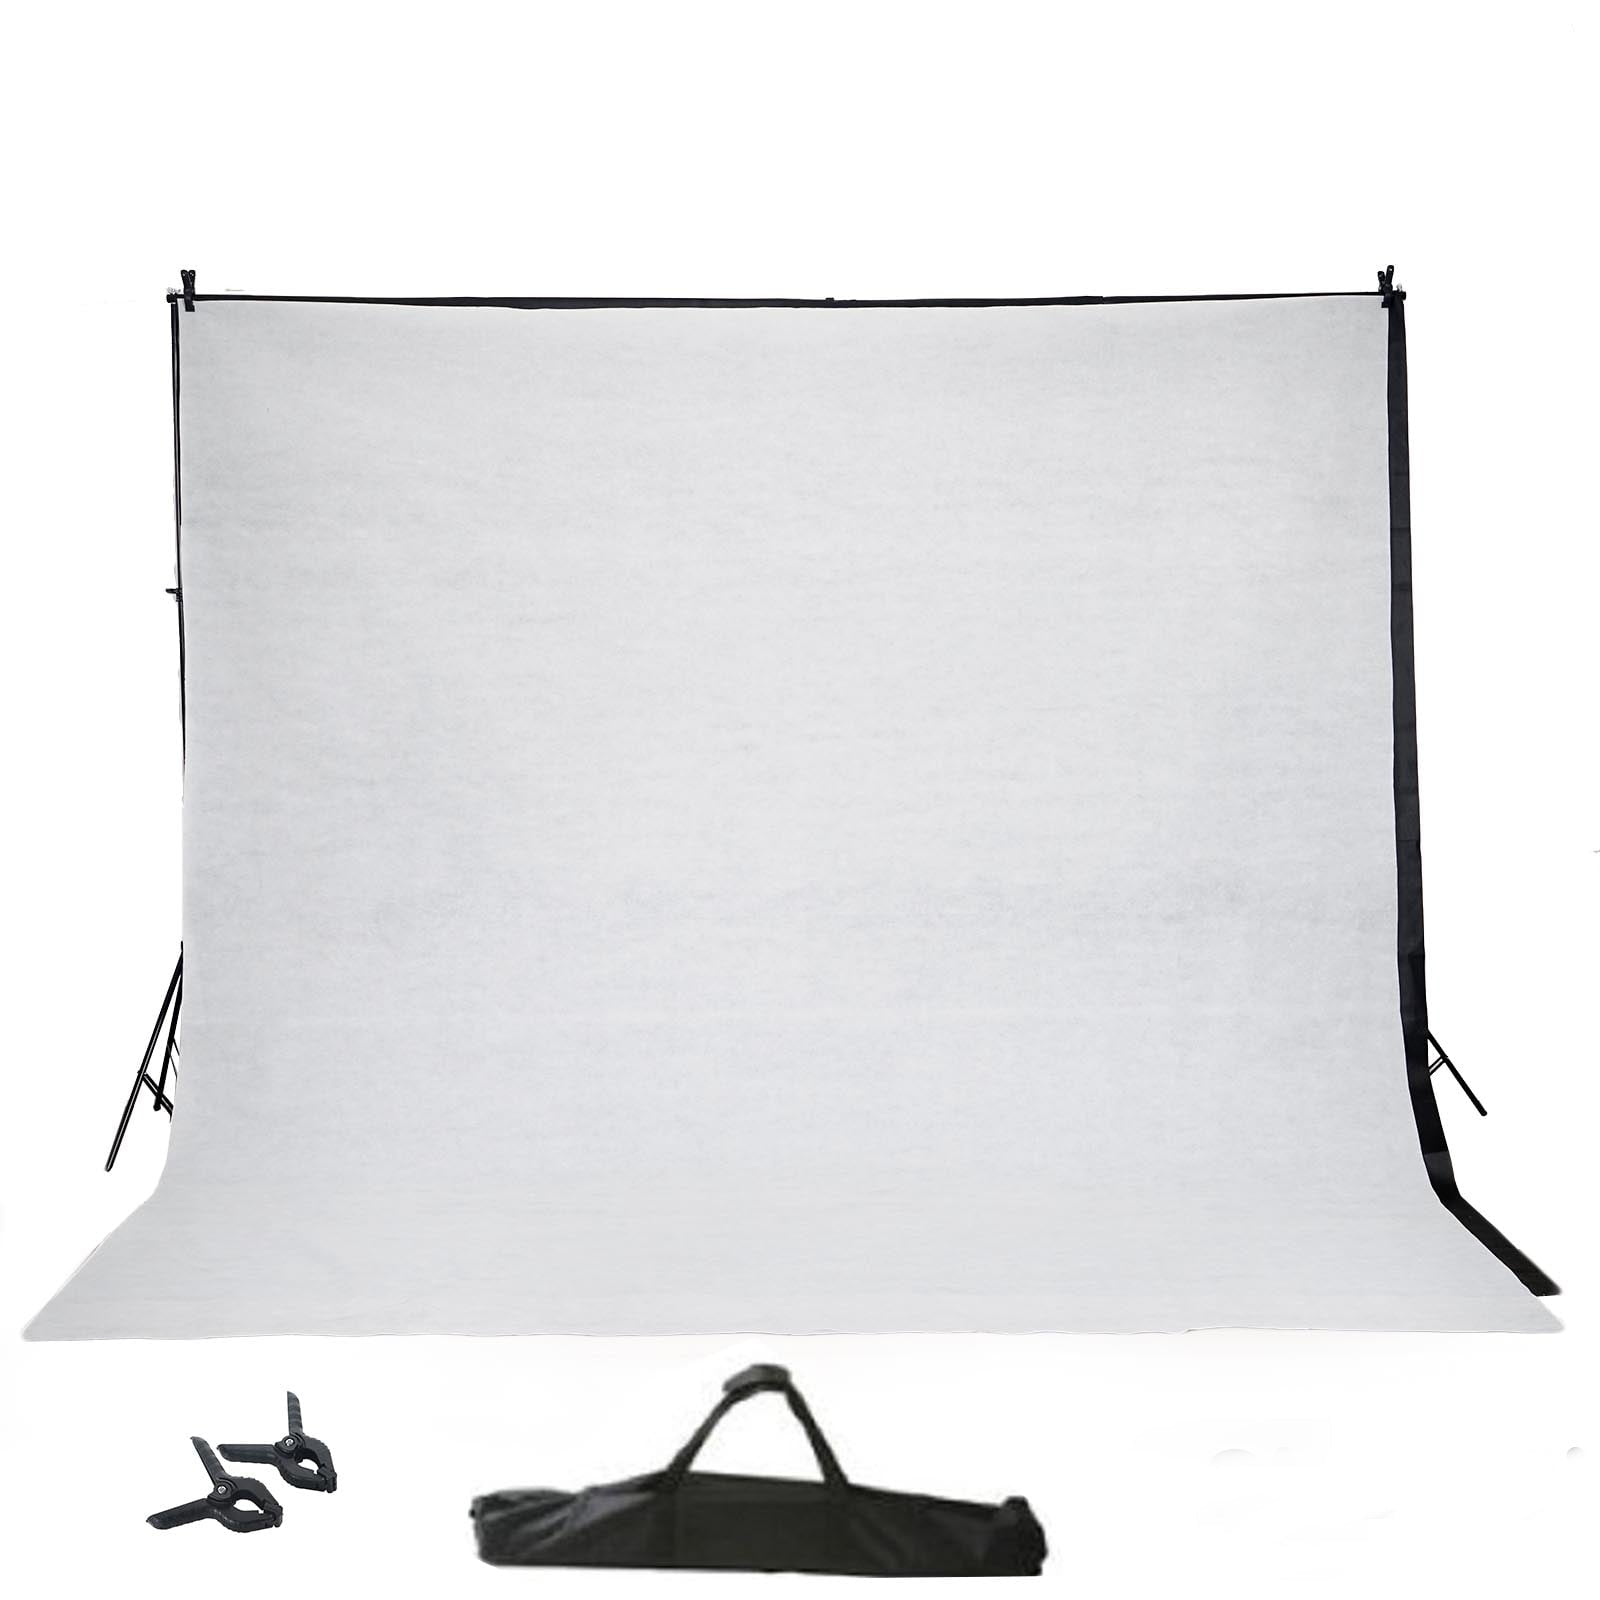 2 FREE Backdrops 8ft x10ft Adjustable Crossbar Kit Photography Backdrop Stand